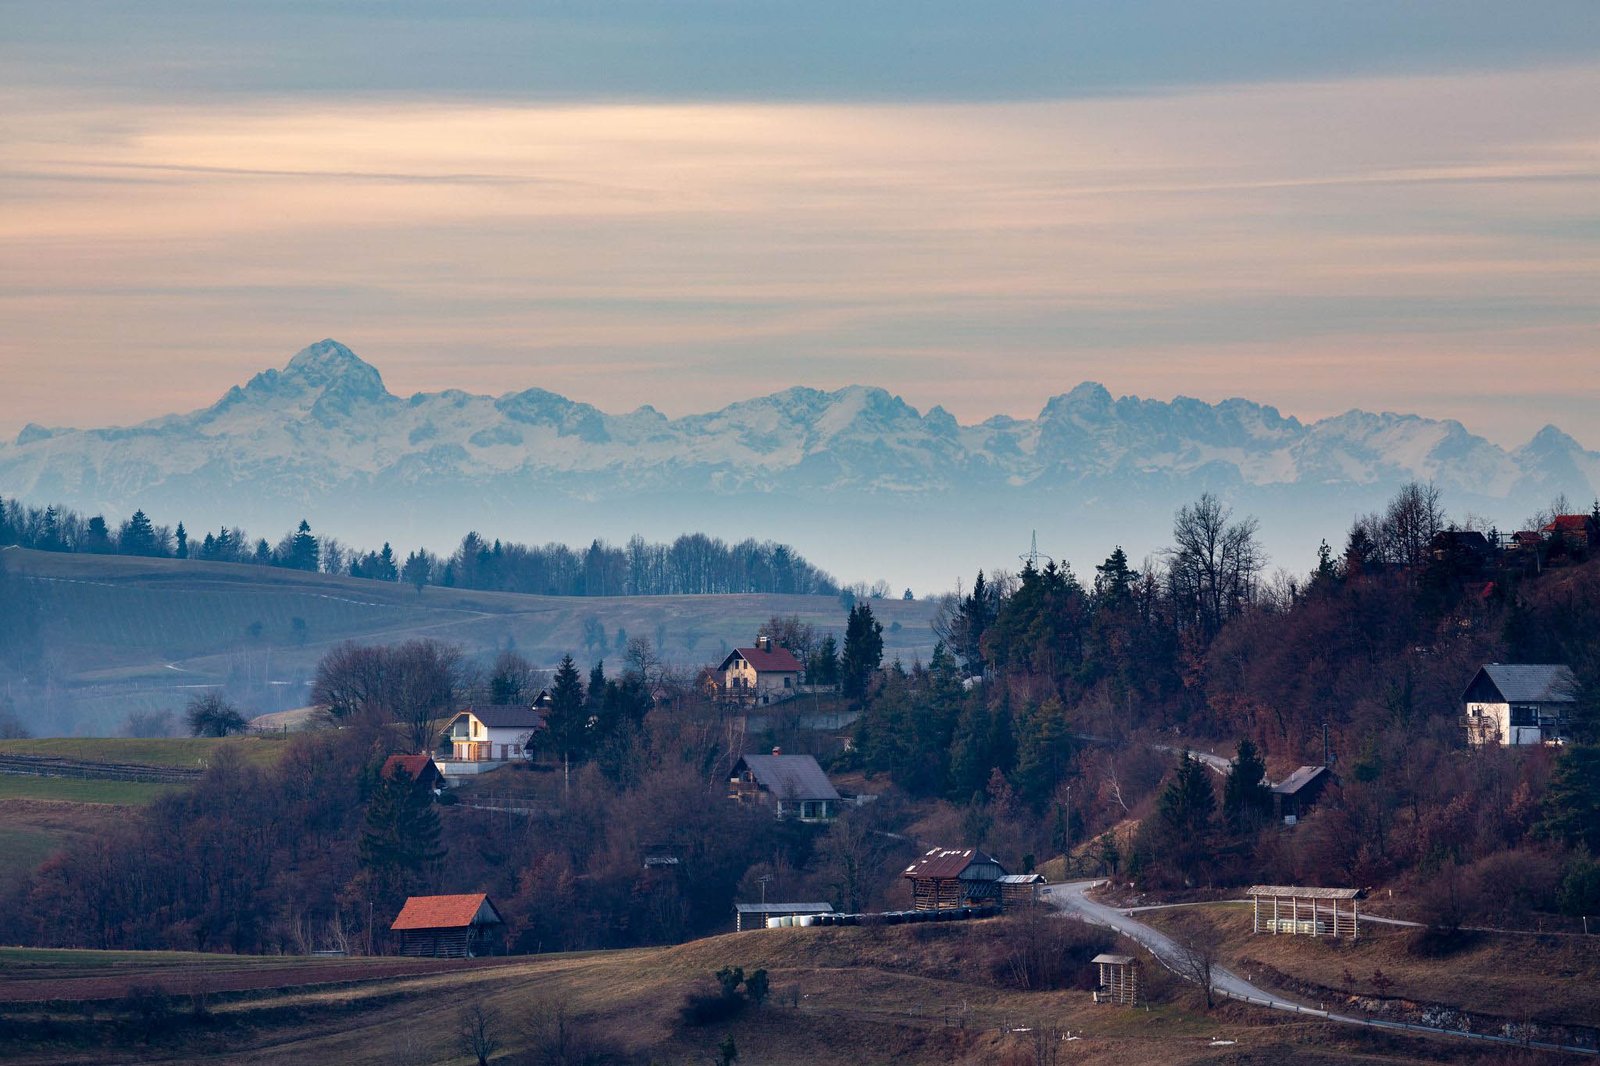 View across the village of Volavje to the Julian Alps mountains in the west. Volavlje is a small village in the hills east of Ljubljana, Slovenia.